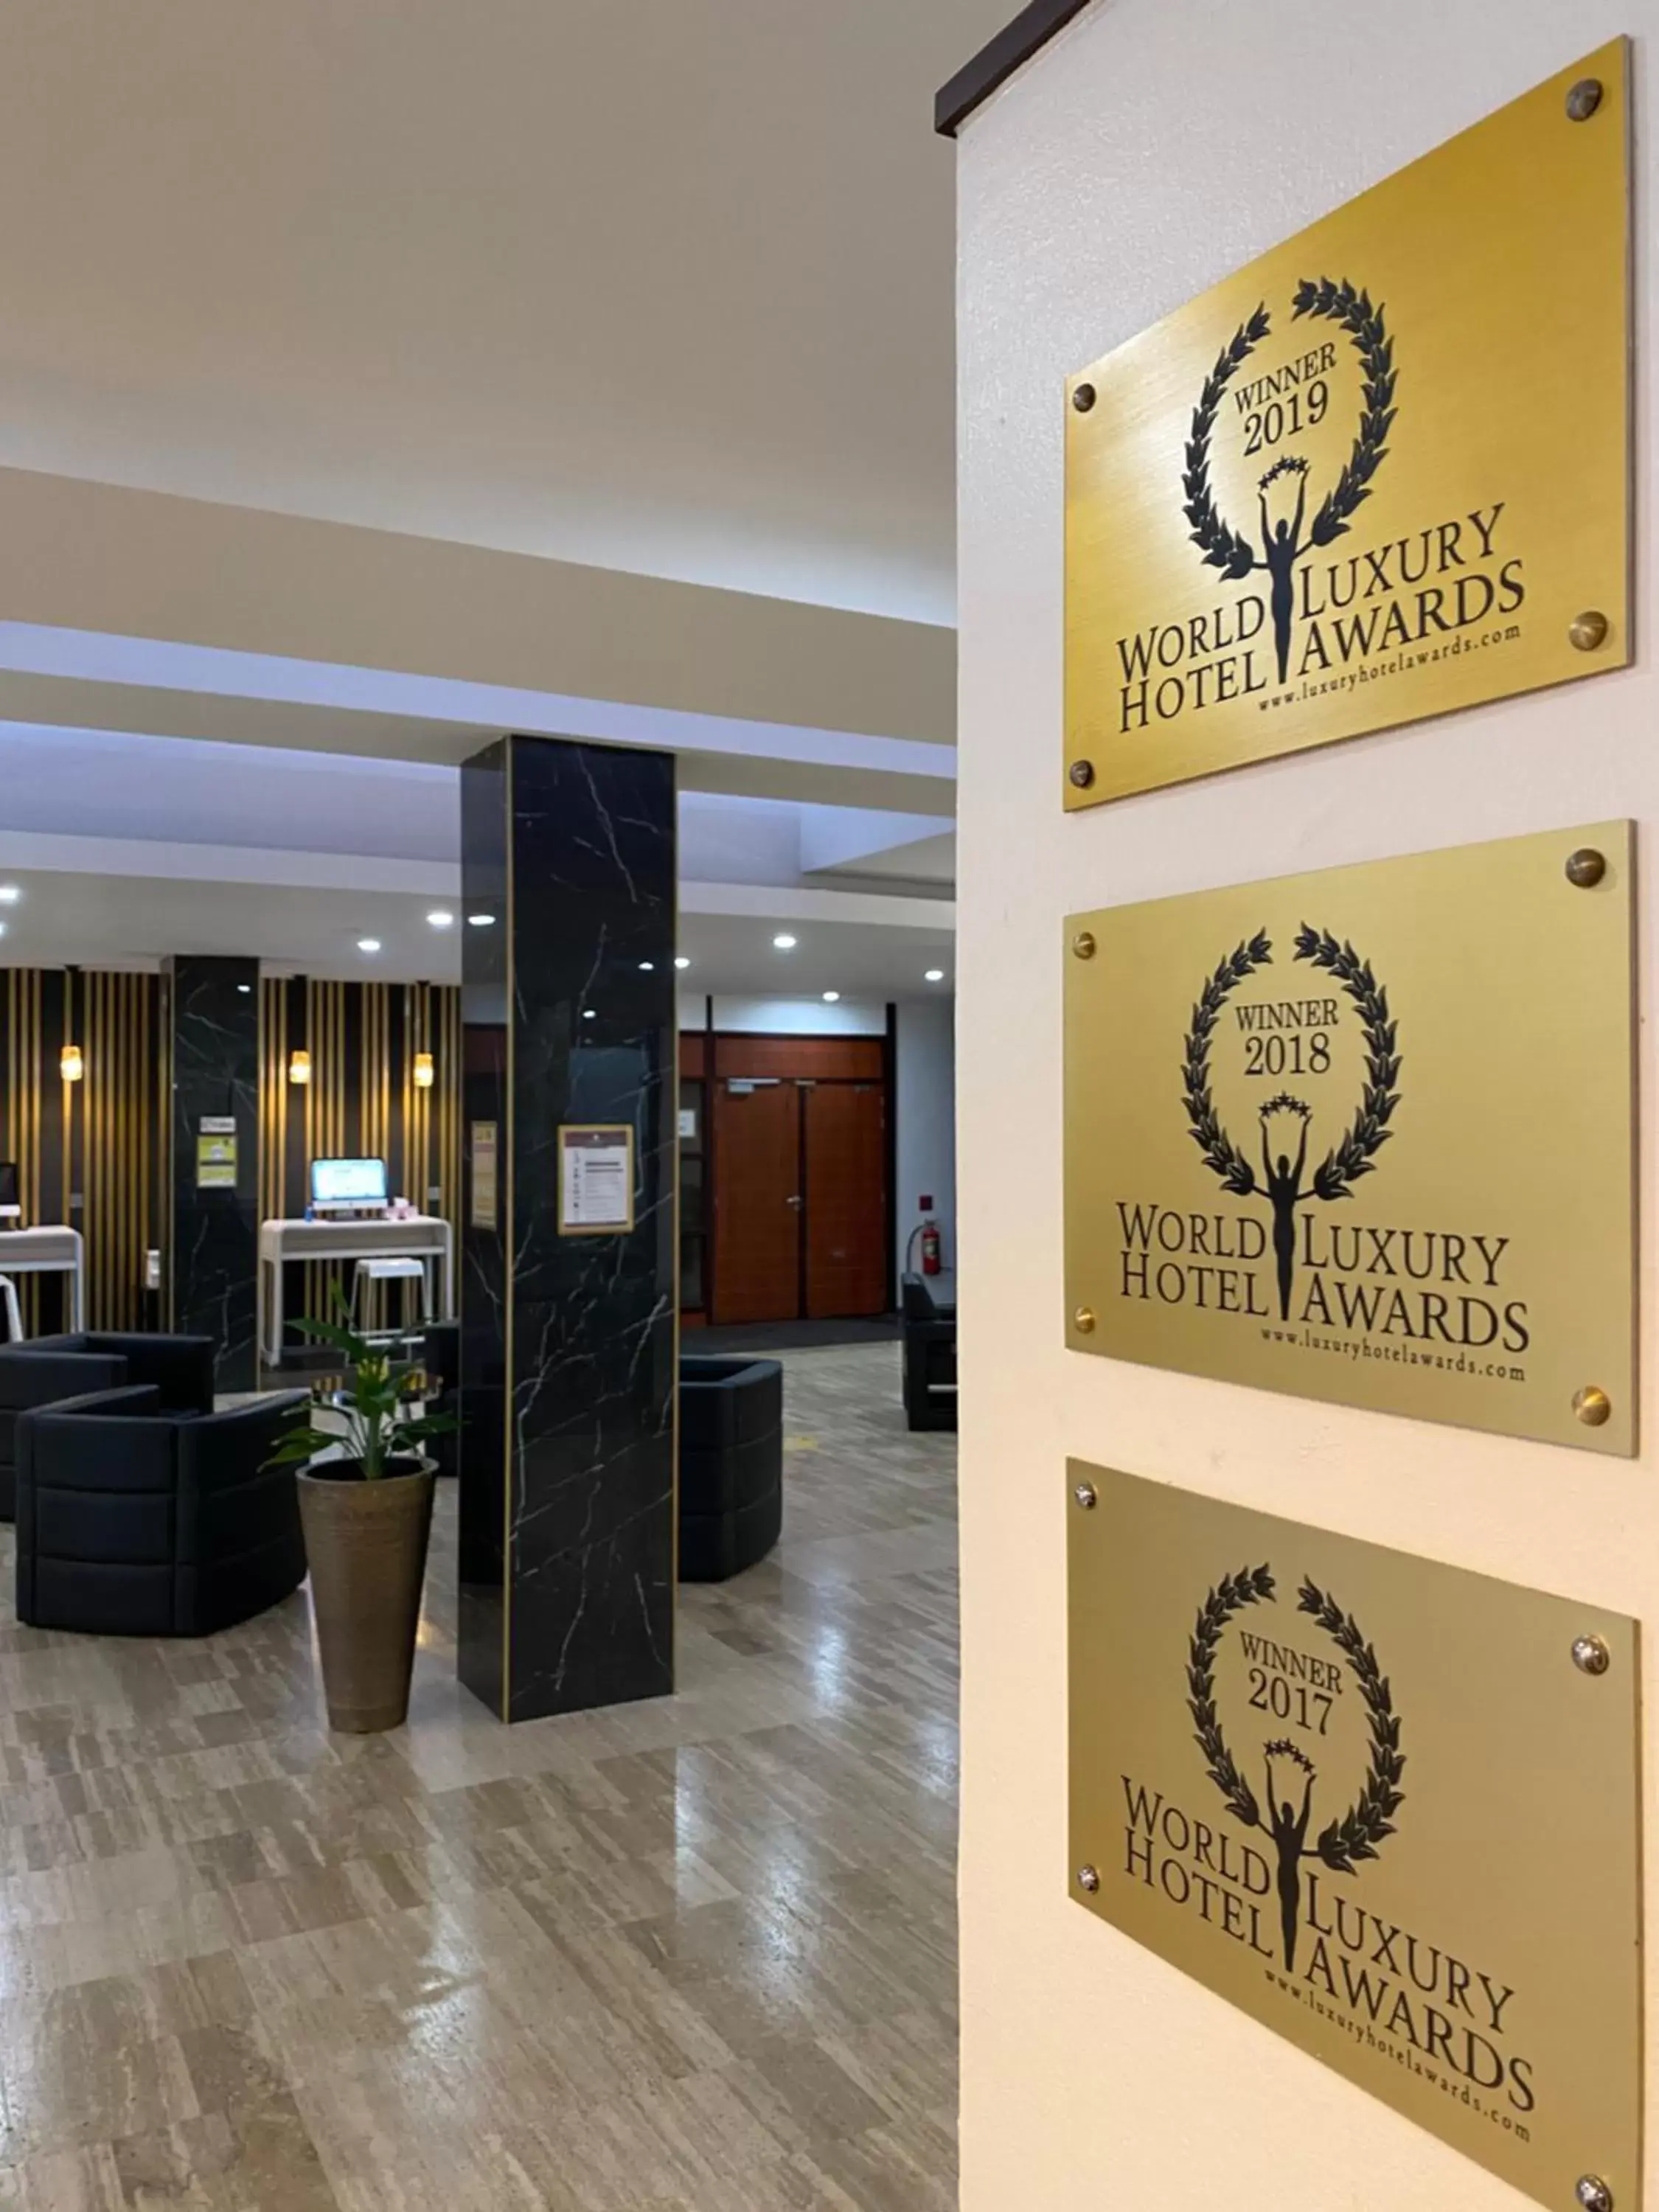 Certificate/Award, Lobby/Reception in Accra City Hotel